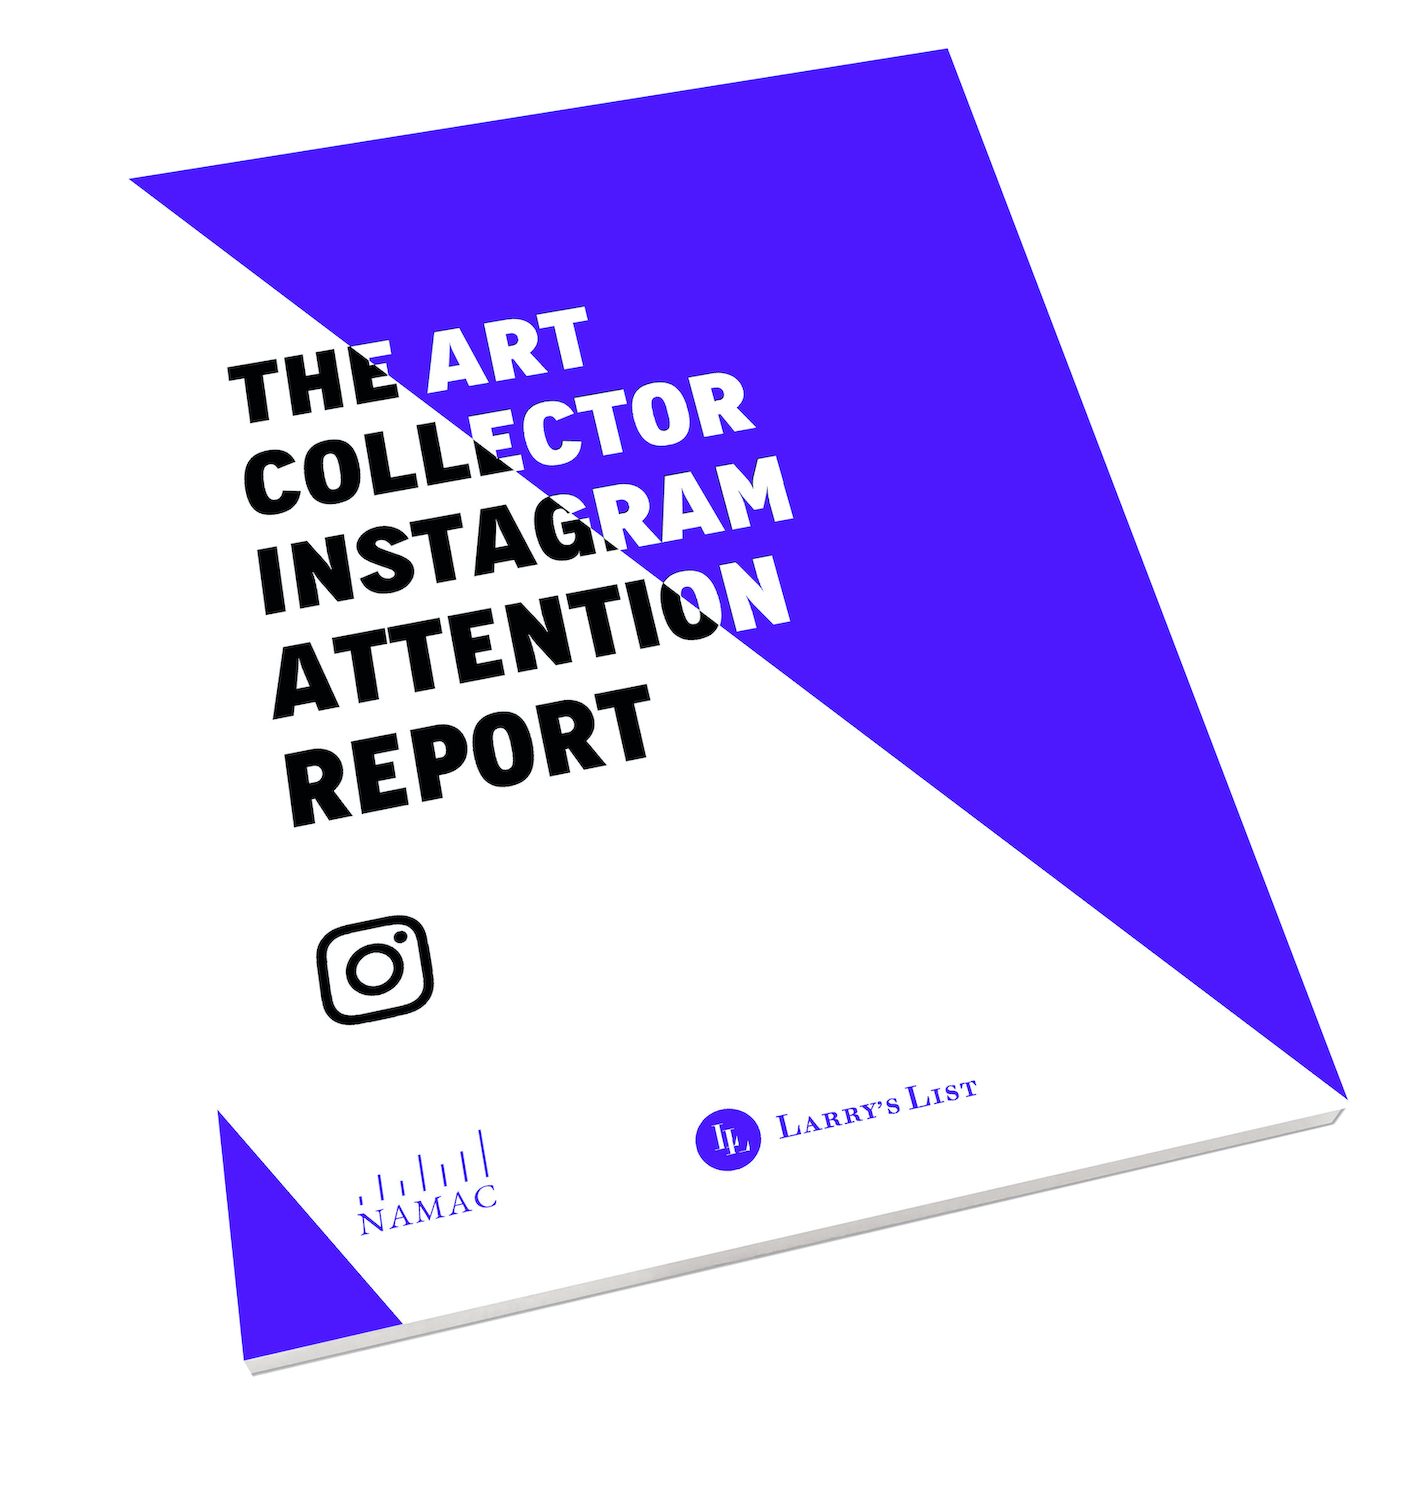 The Art Collector IG Attention Report_B